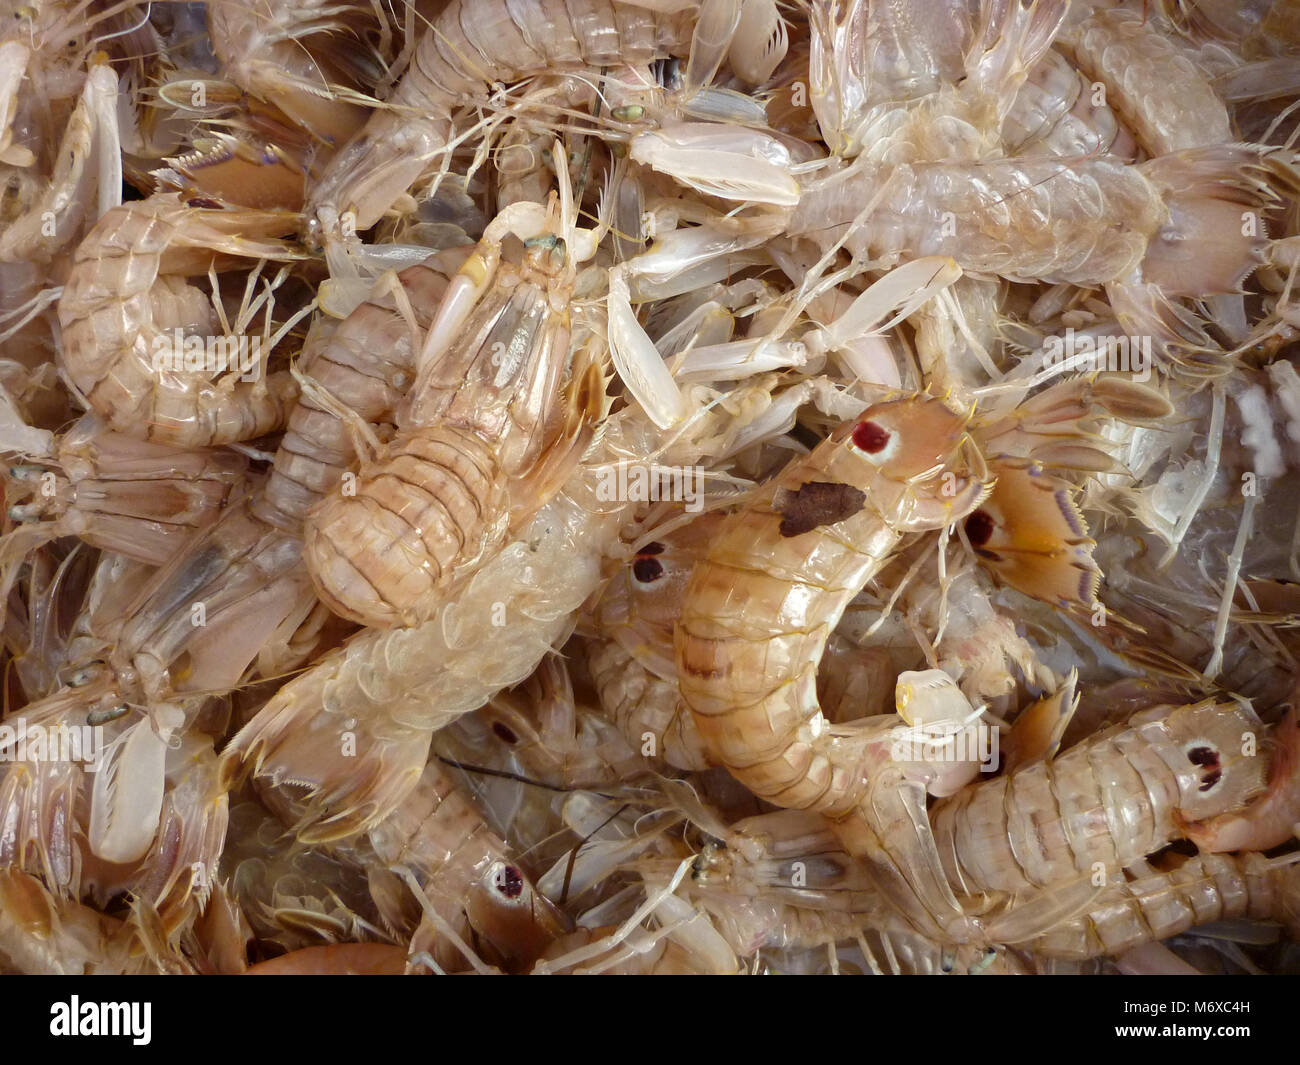 Squilla mantis for sale at a greek fish market. Squilla mantis is a species of mantis shrimp found in shallow coastal areas of the Mediterranean Sea. Stock Photo